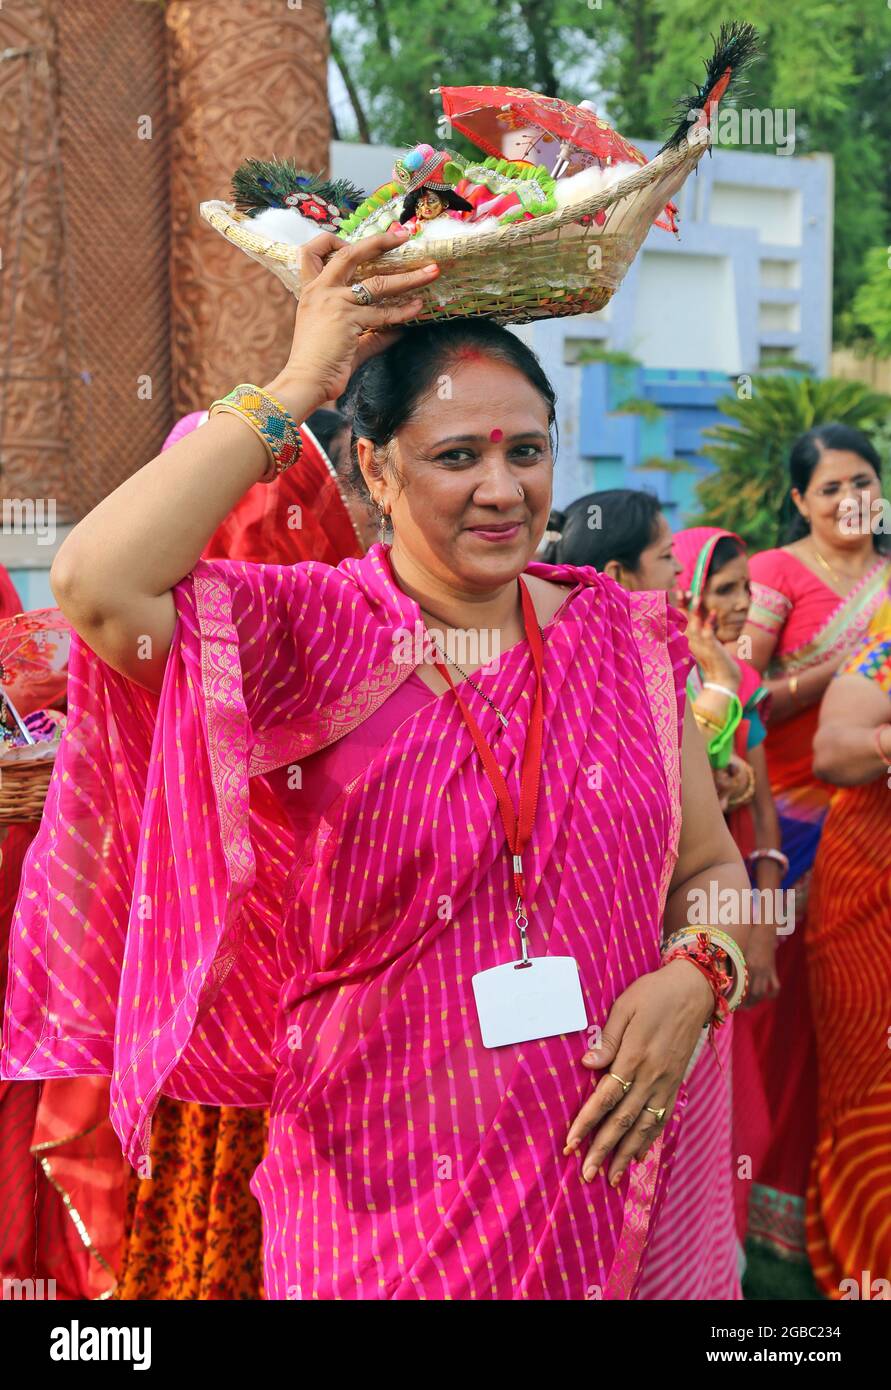 Beawar, Rajasthan, India, August 2, 2021: Hindu woman carrying the idol of Laddu Gopal (Lord Krishna), pose for a picture as she celebrate the holy month of Sawan (Shravan) in Beawar. Photo: Sumit Saraswat Stock Photo